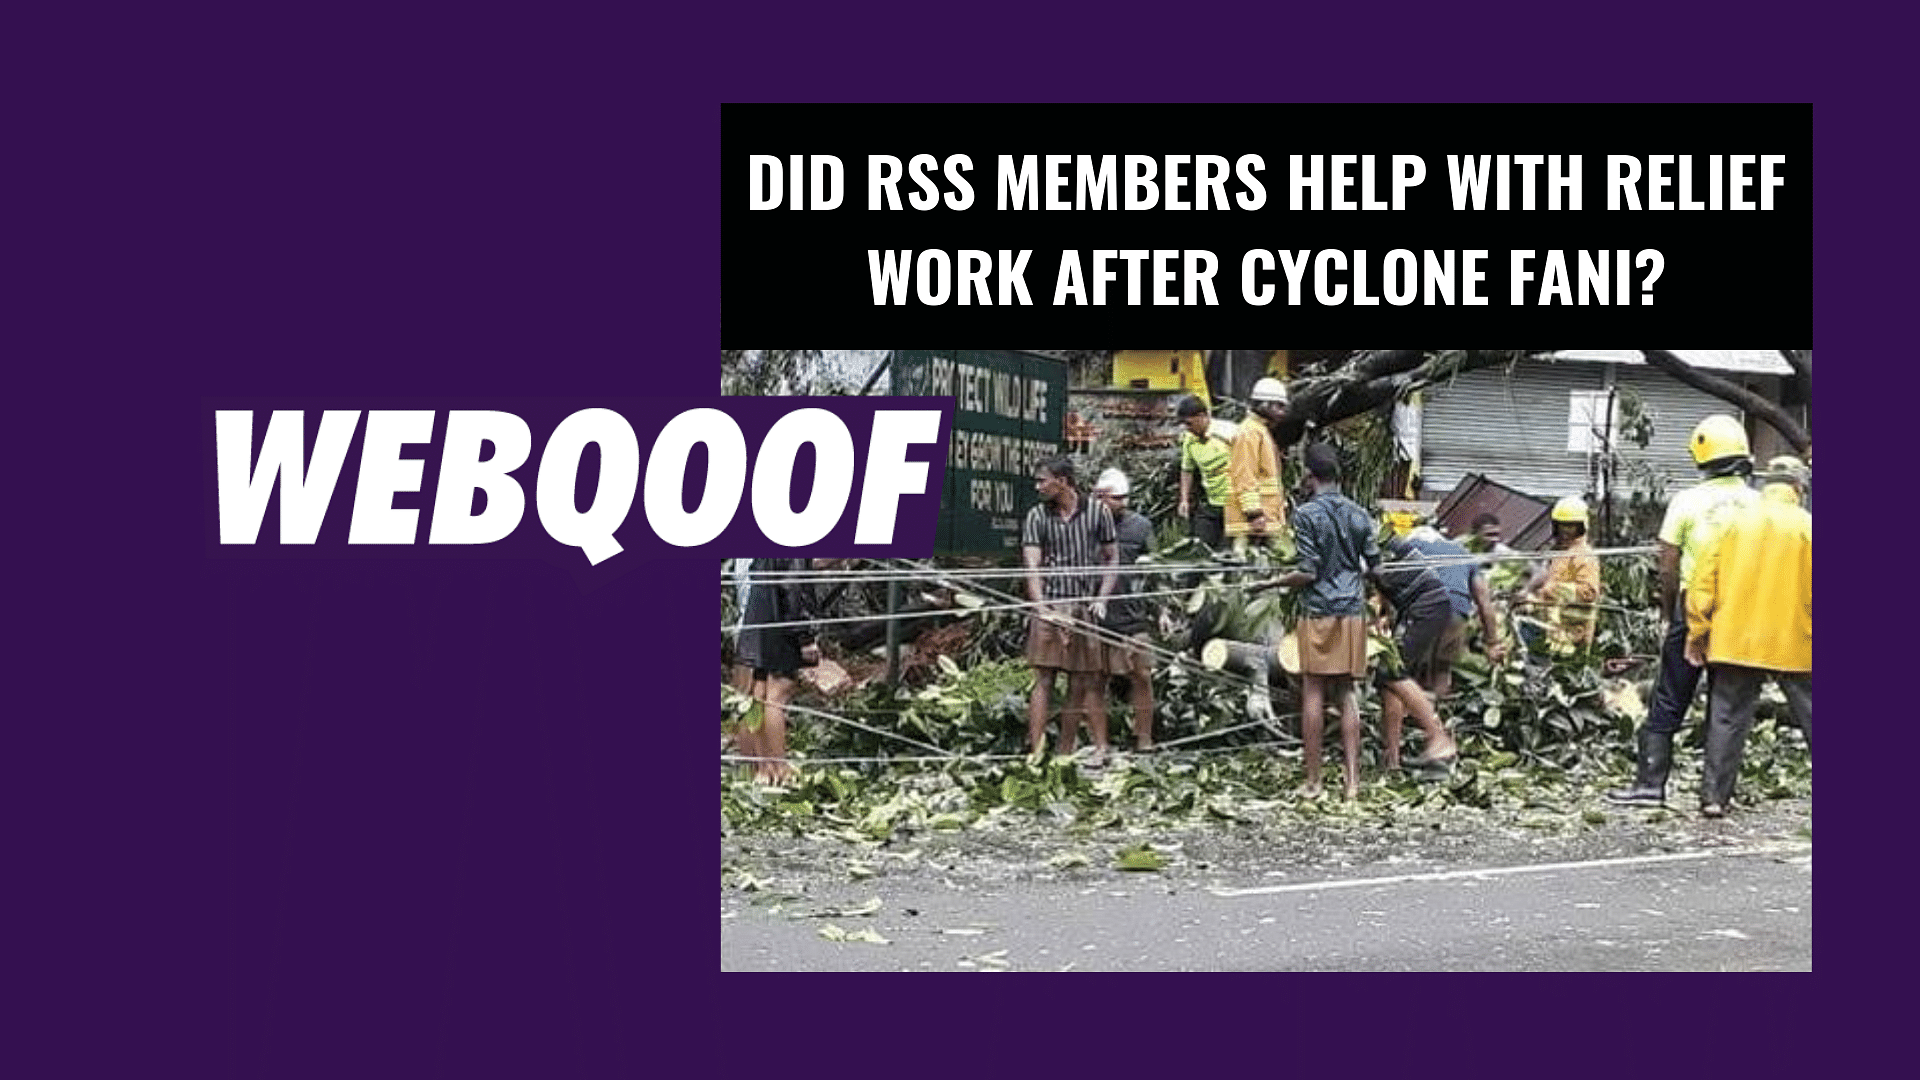 The original images were from when cyclone Ockhi and cyclone Titli hit.